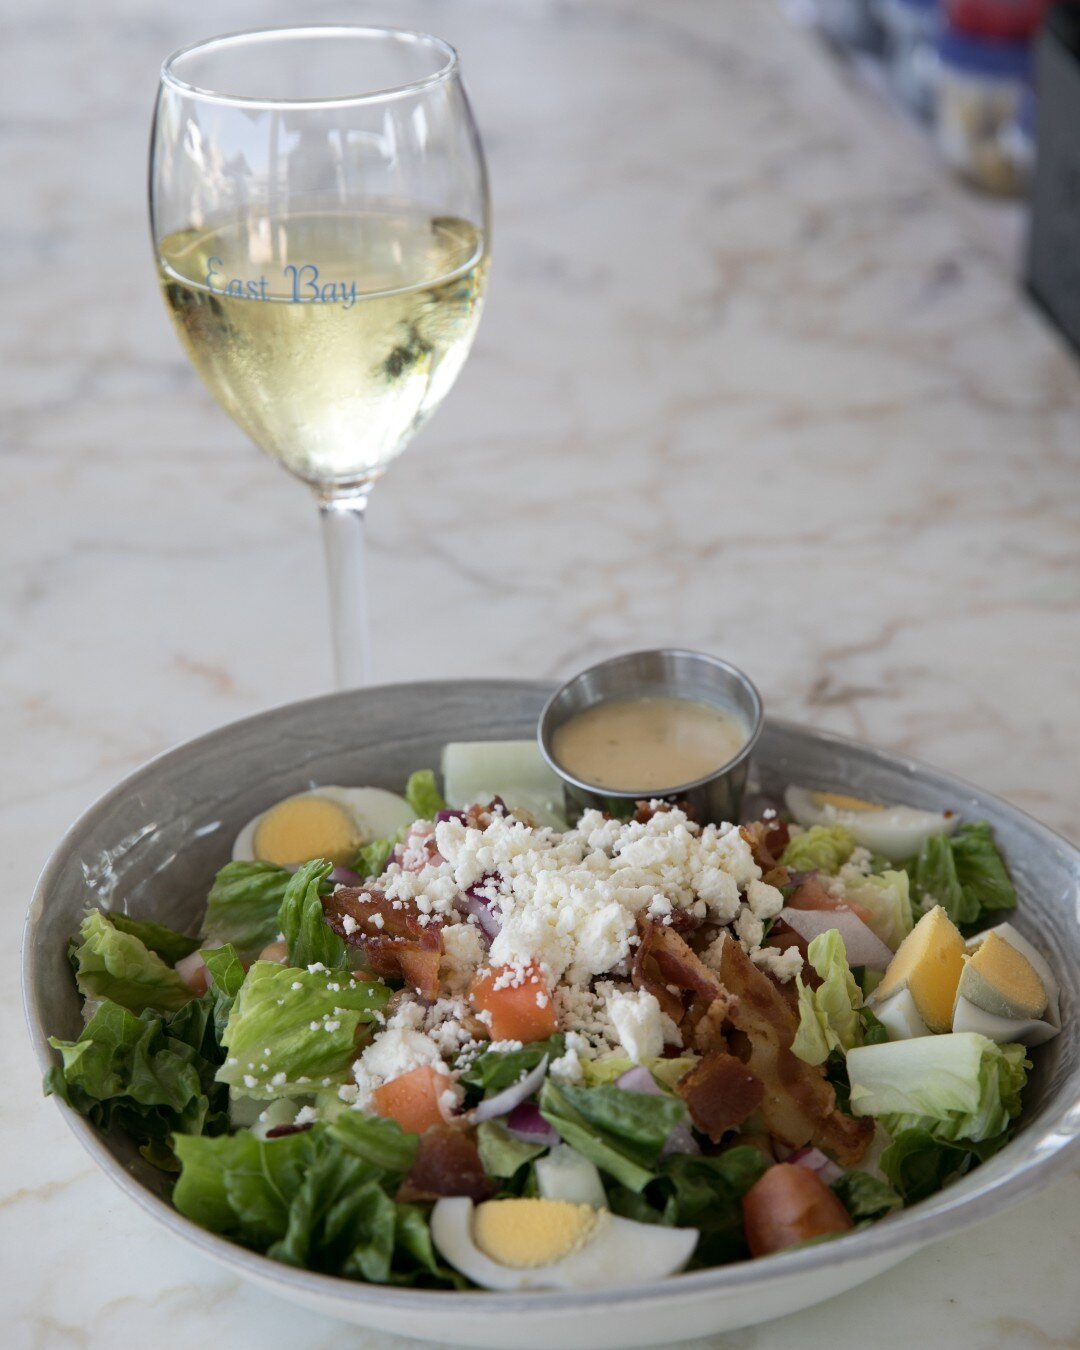 Wine + Salad + Patio is exactly what you needed today.